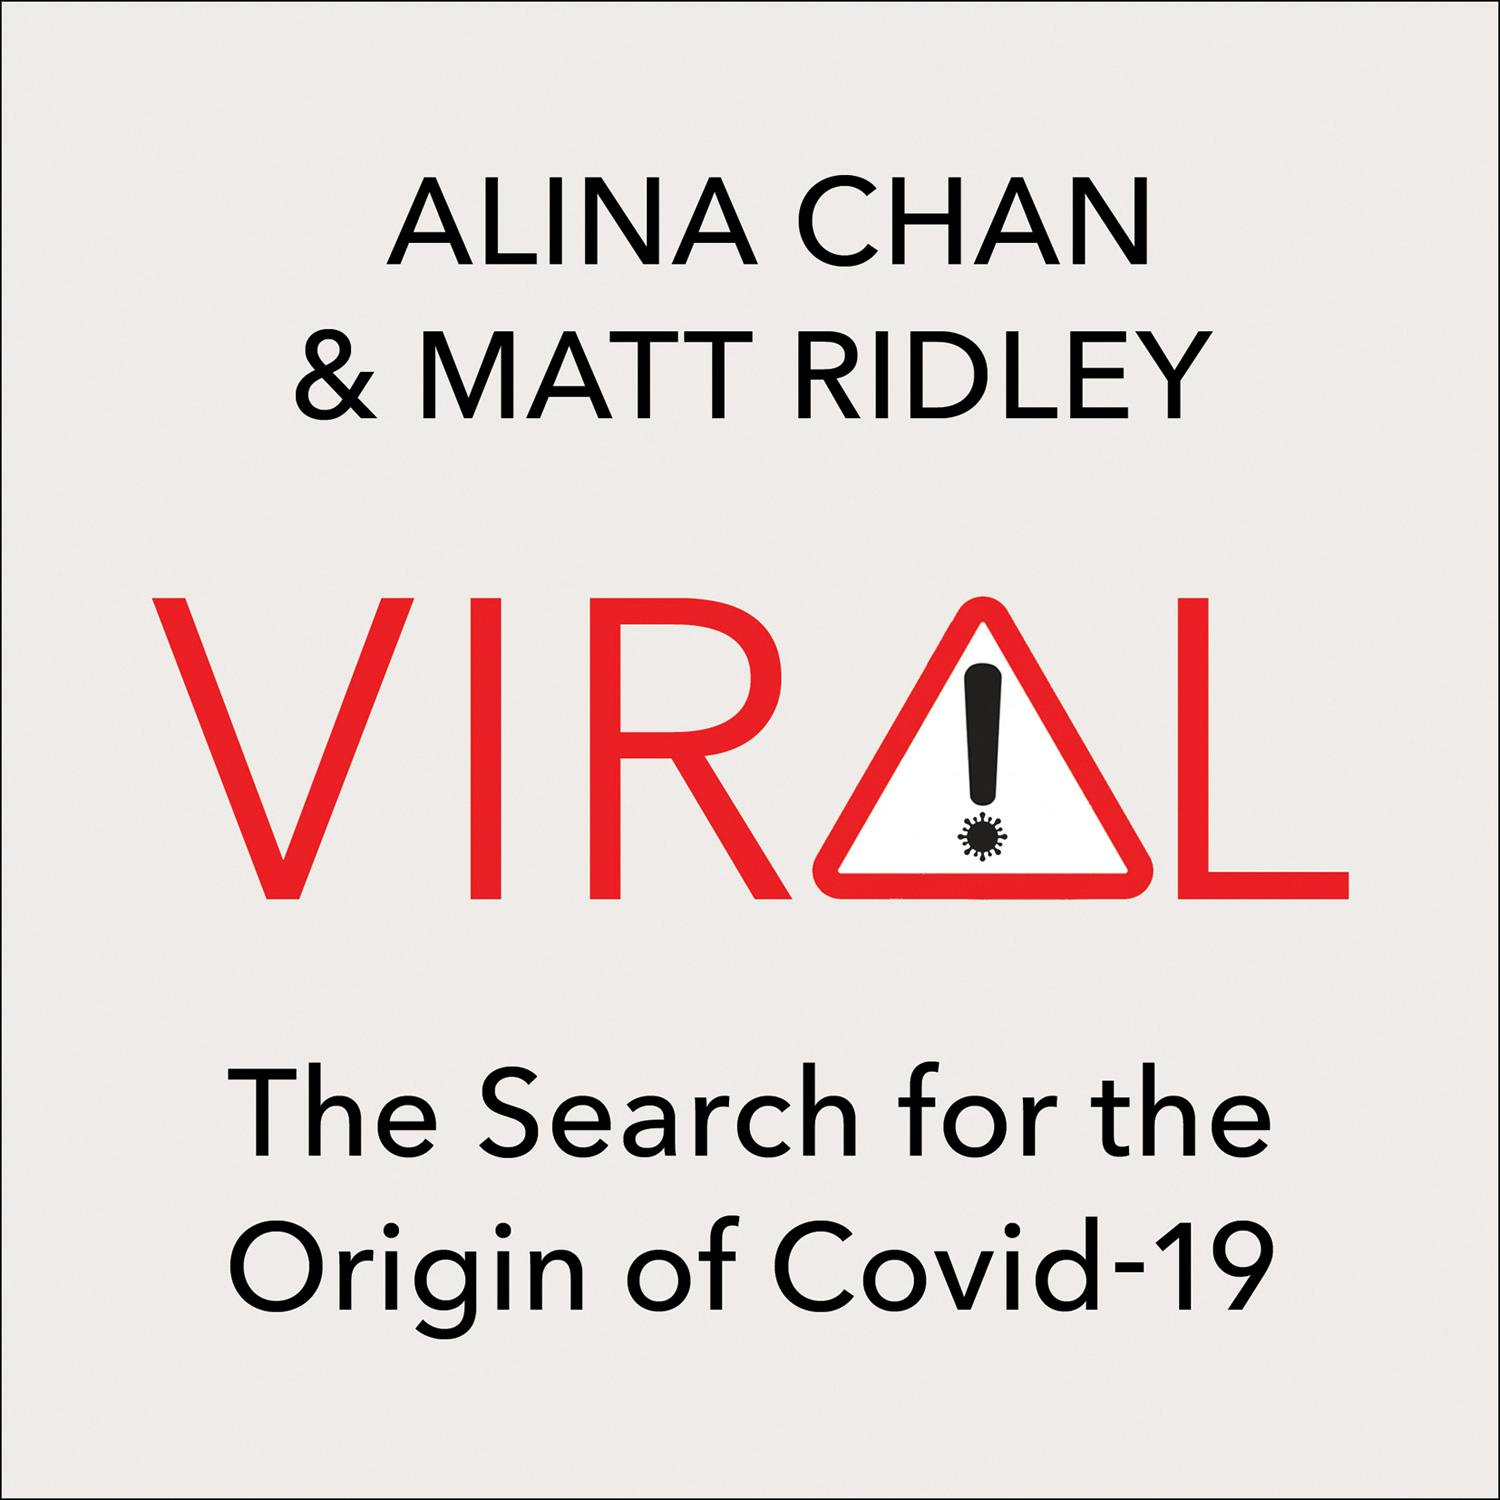 Viral: The Search for the Origin of Covid-19 - Alina Chan, Matt Ridley